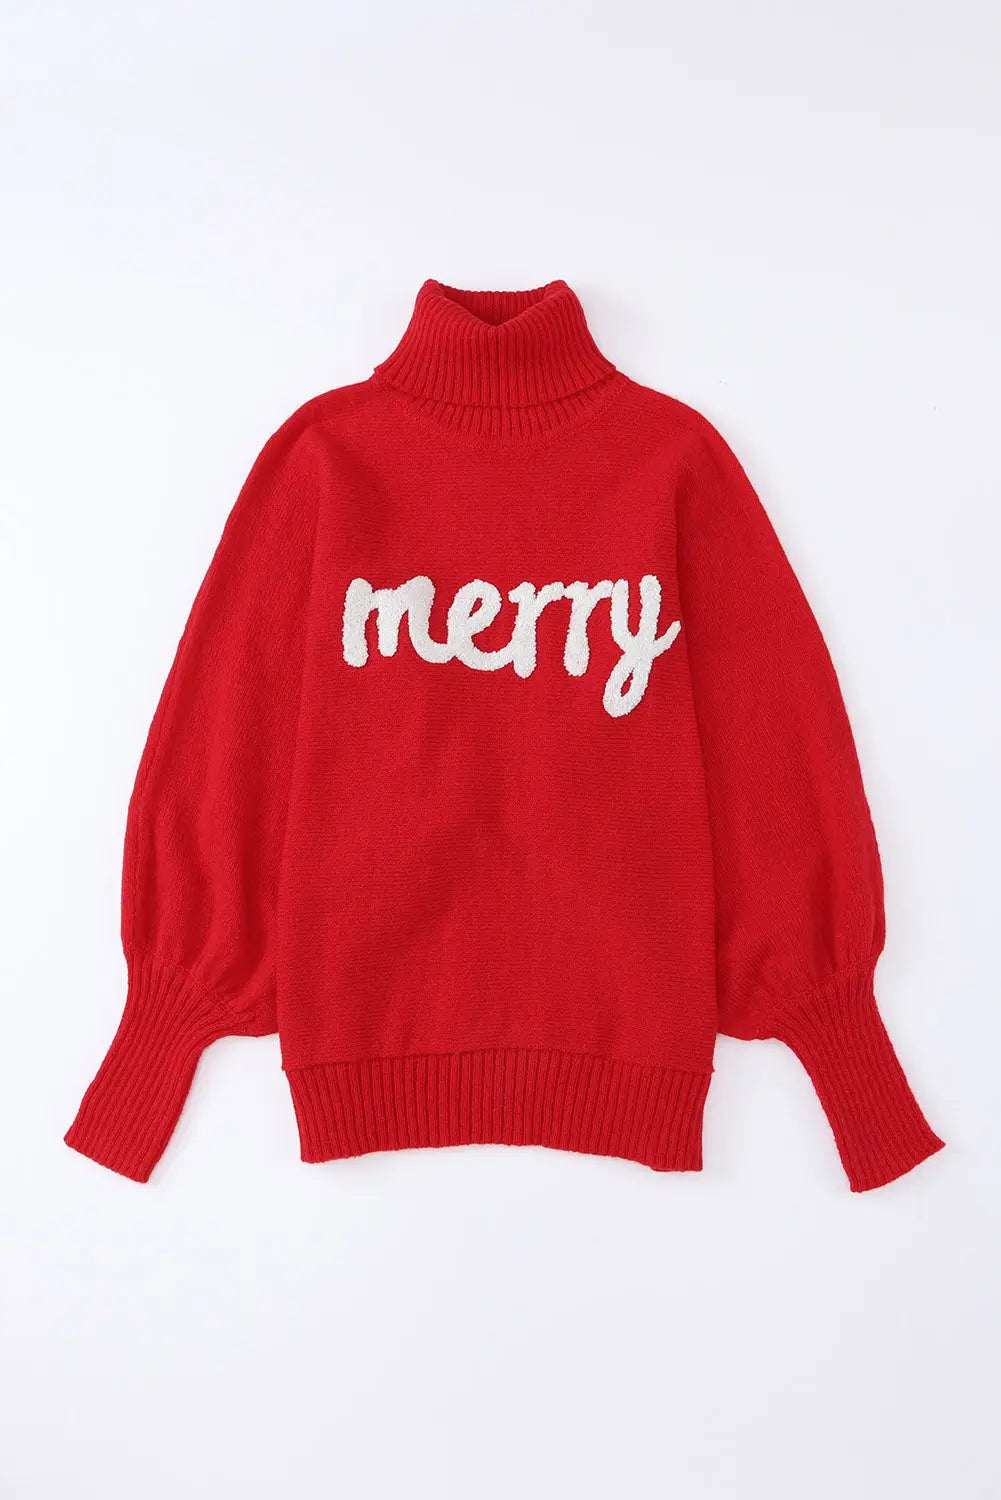 Fiery red christmas holly jolly tinsel graphic high neck sweater - tops